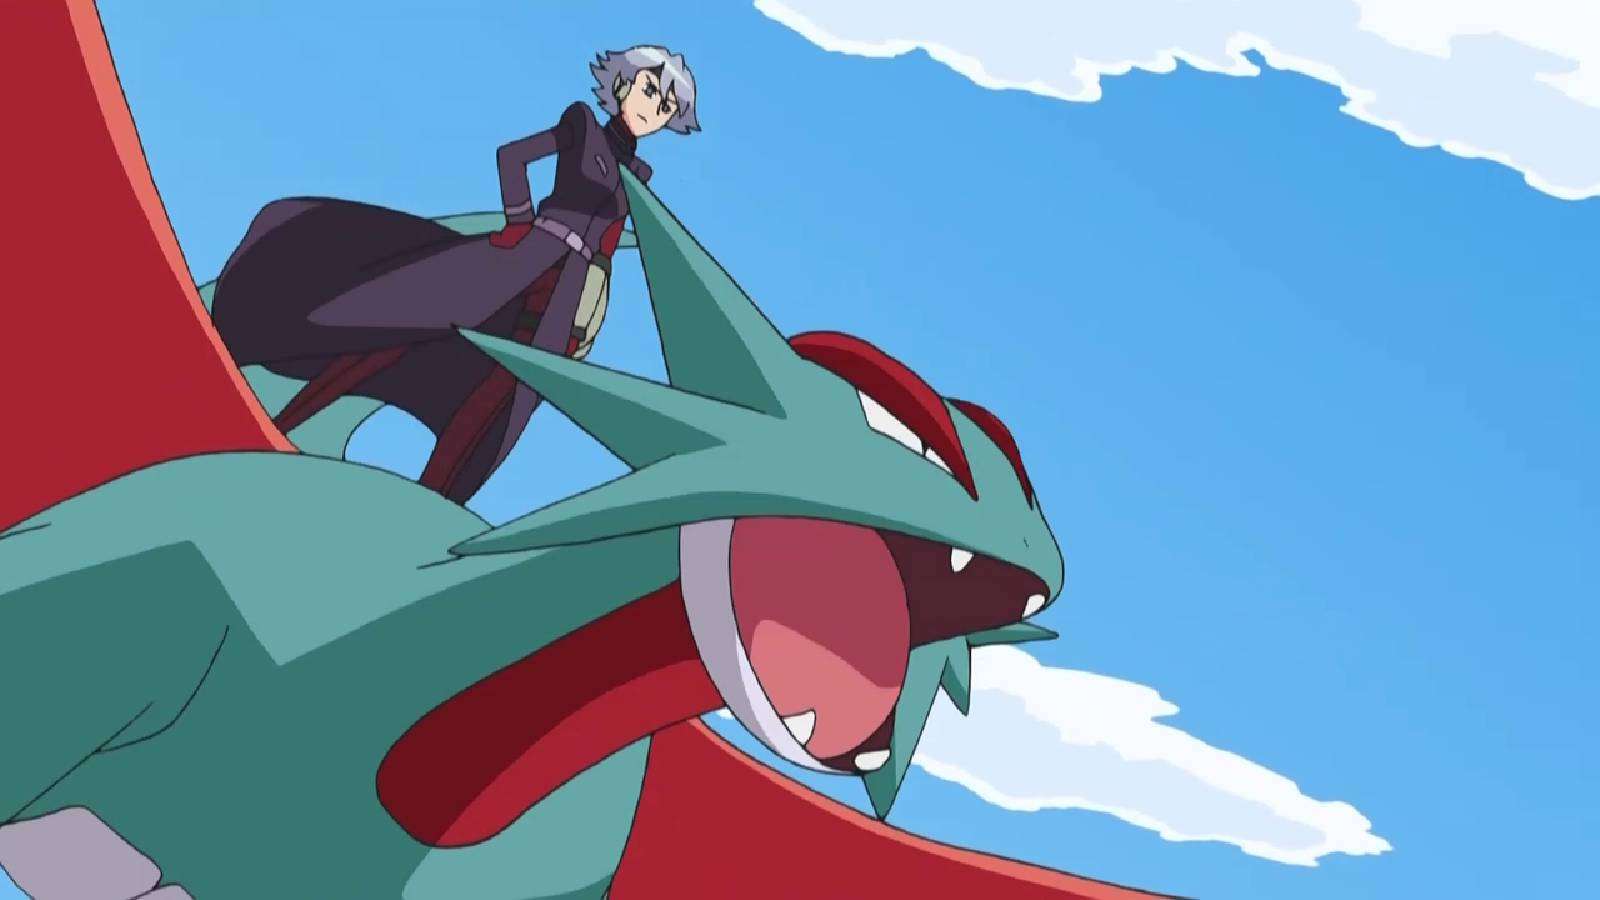 The character Hunter J rides a Salamence in the Pokemon anime